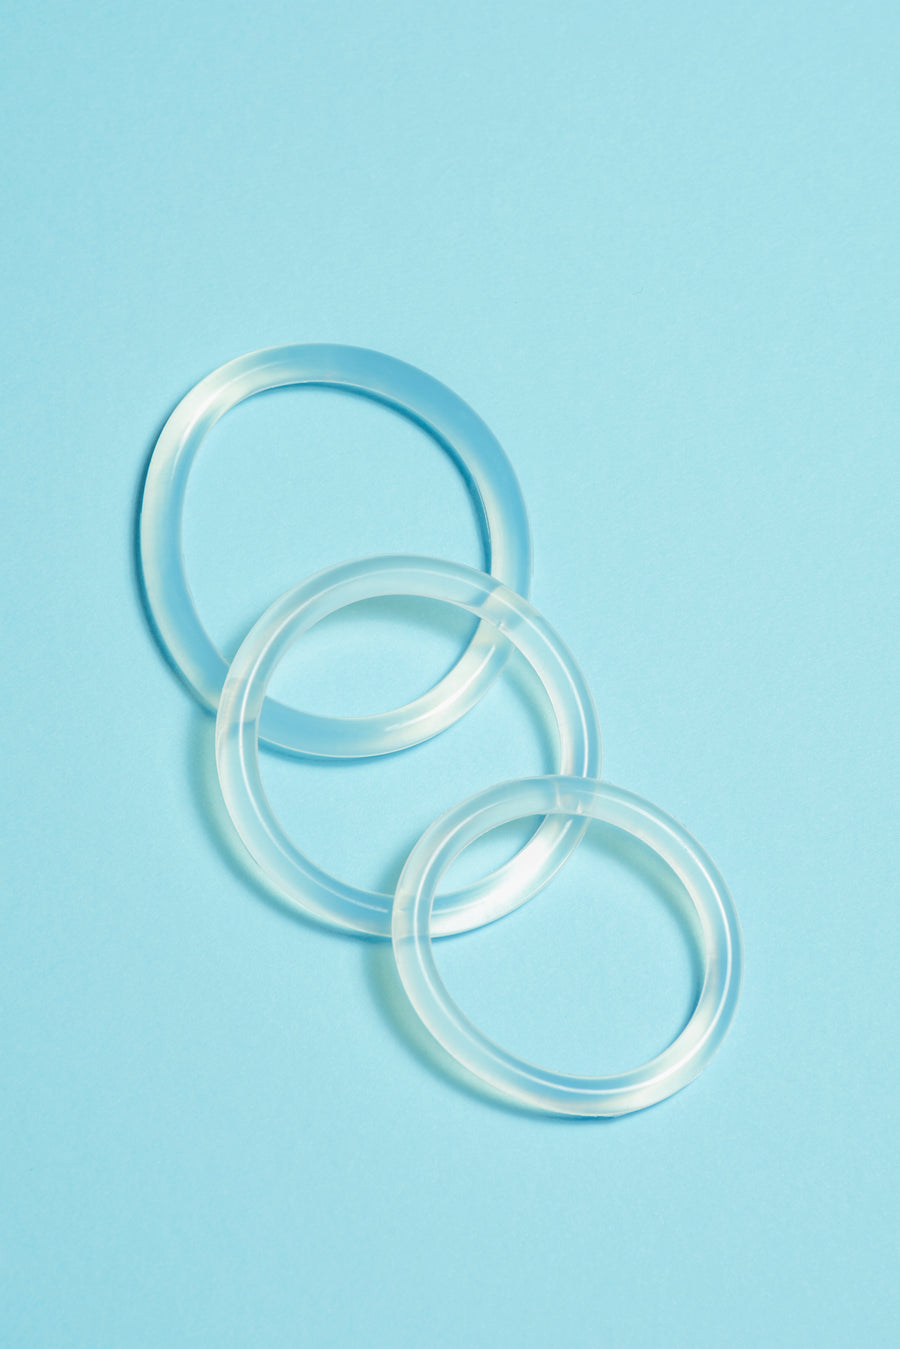 COCK & BALL SILICONE RINGS SET 3 PCS